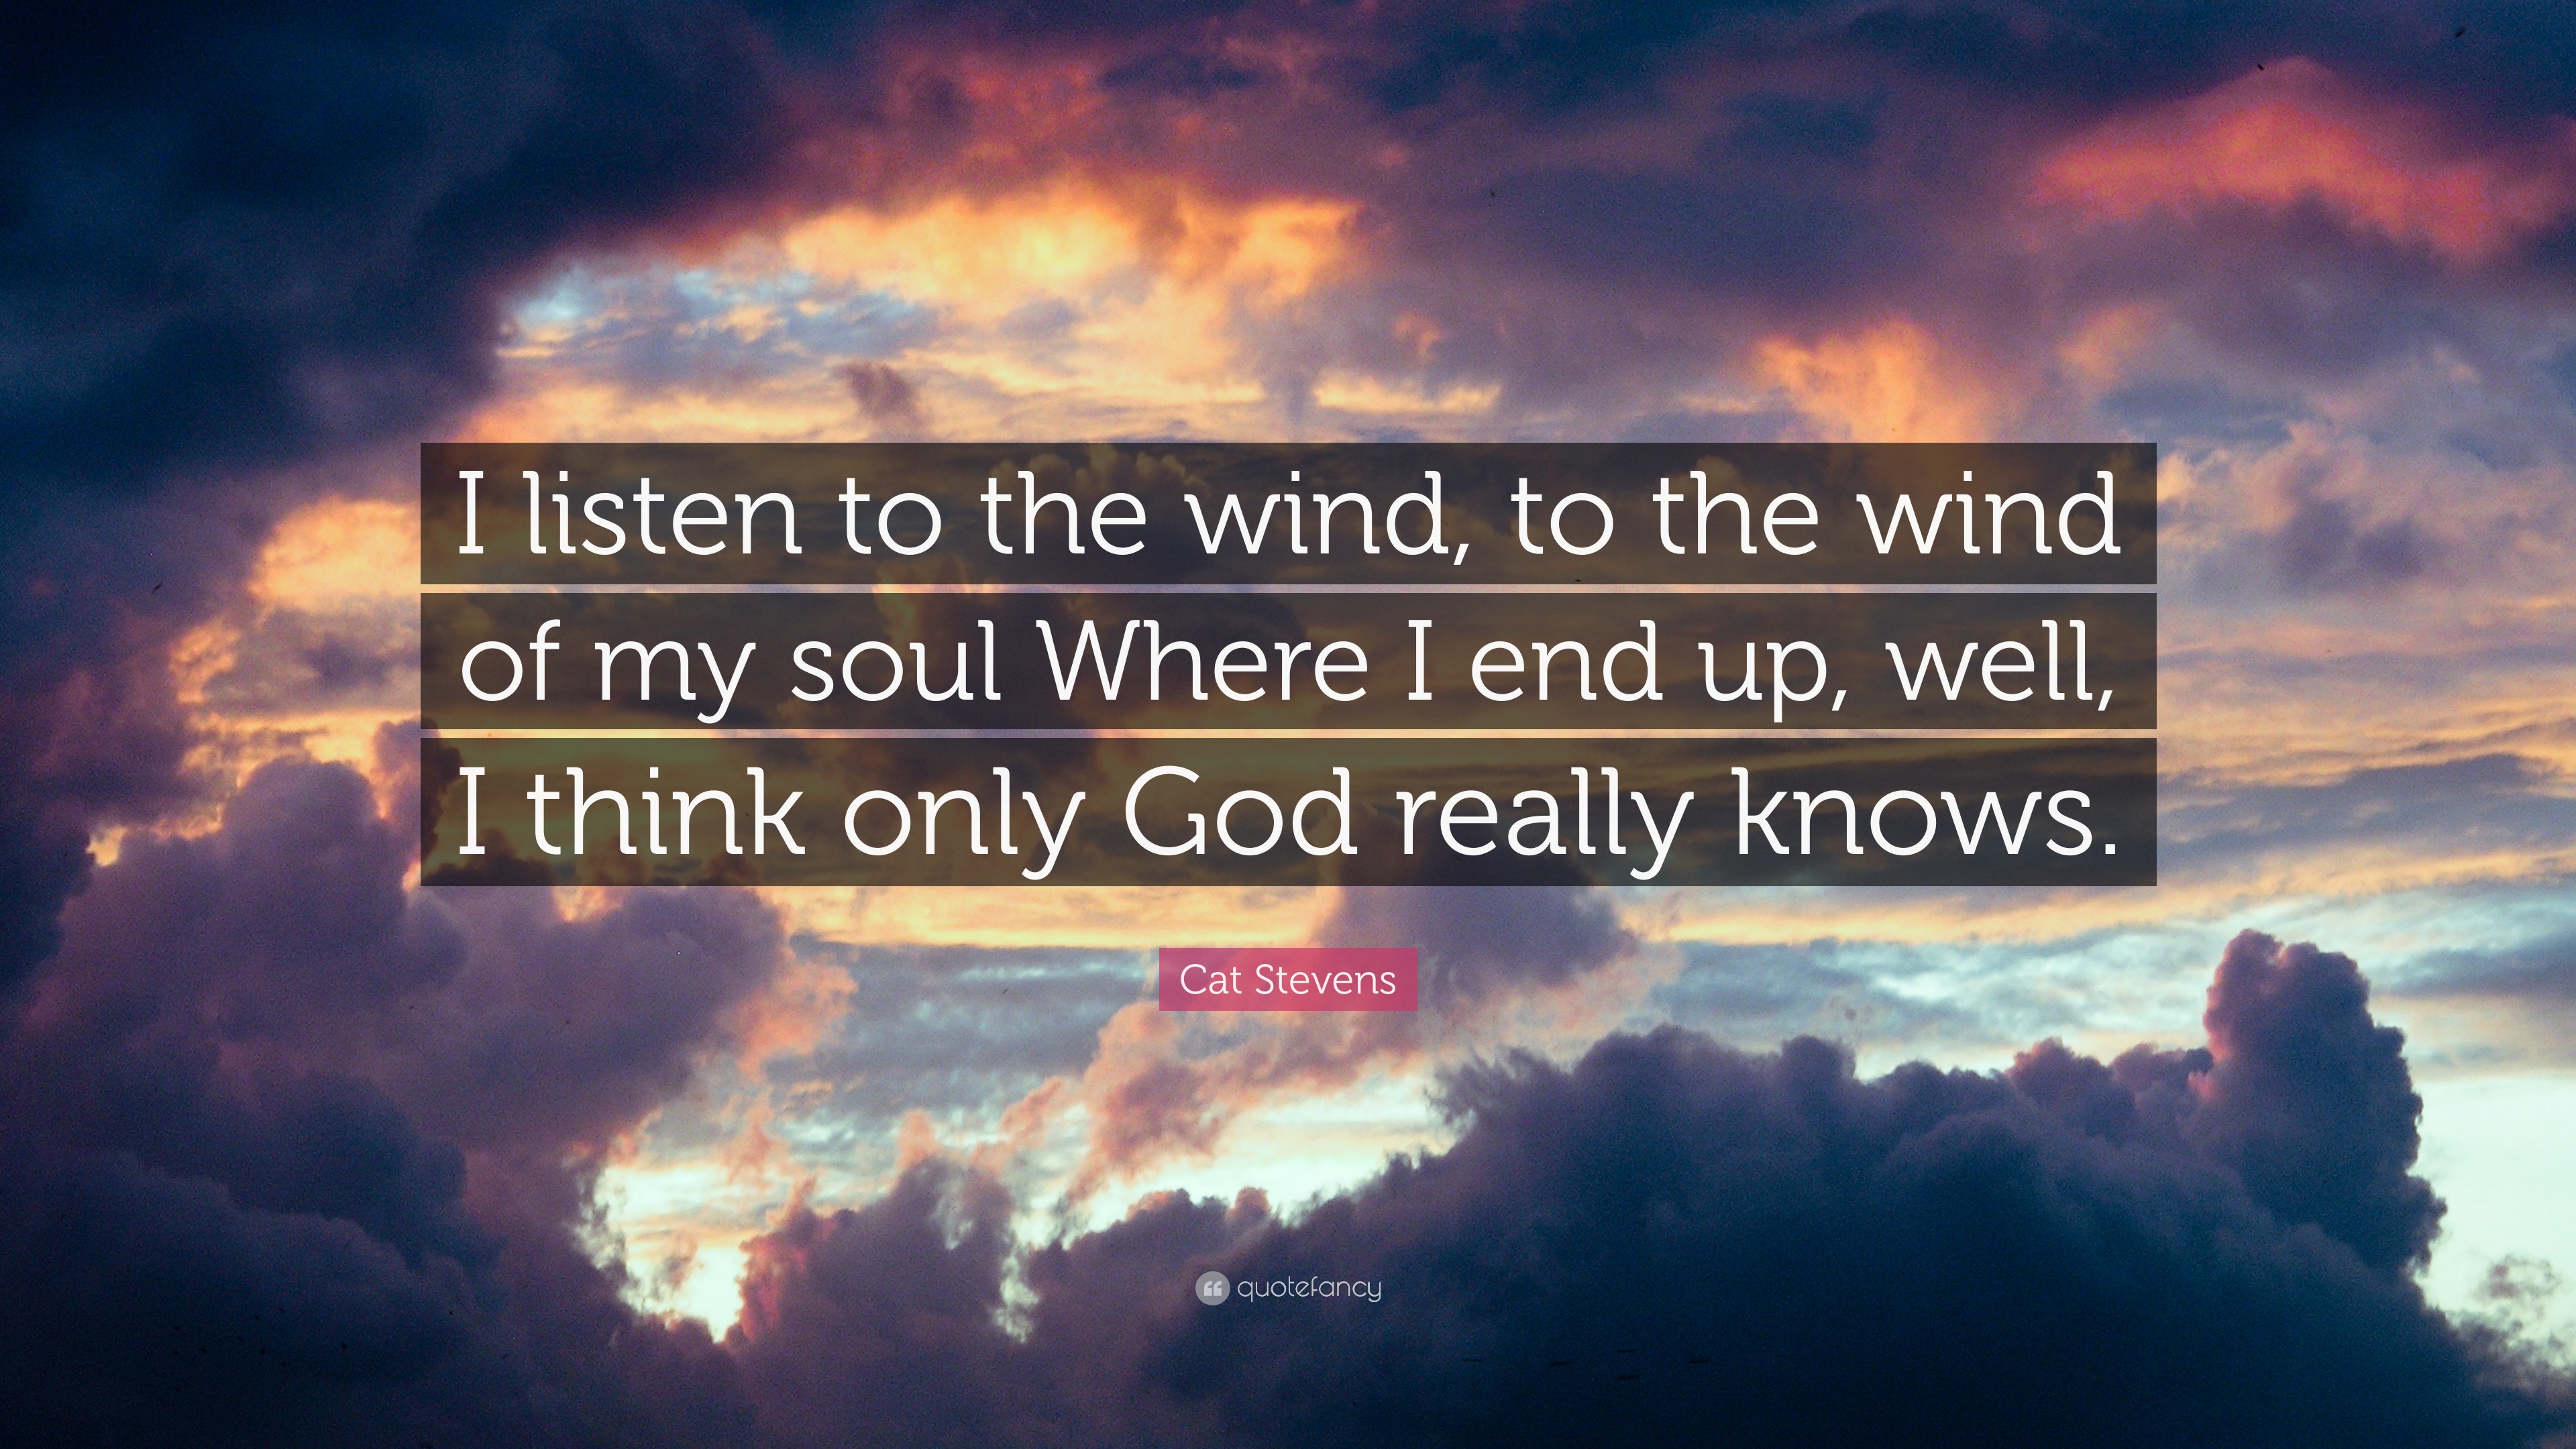 Cat Stevens Quote: “I listen to the wind, to the wind of my soul Where I